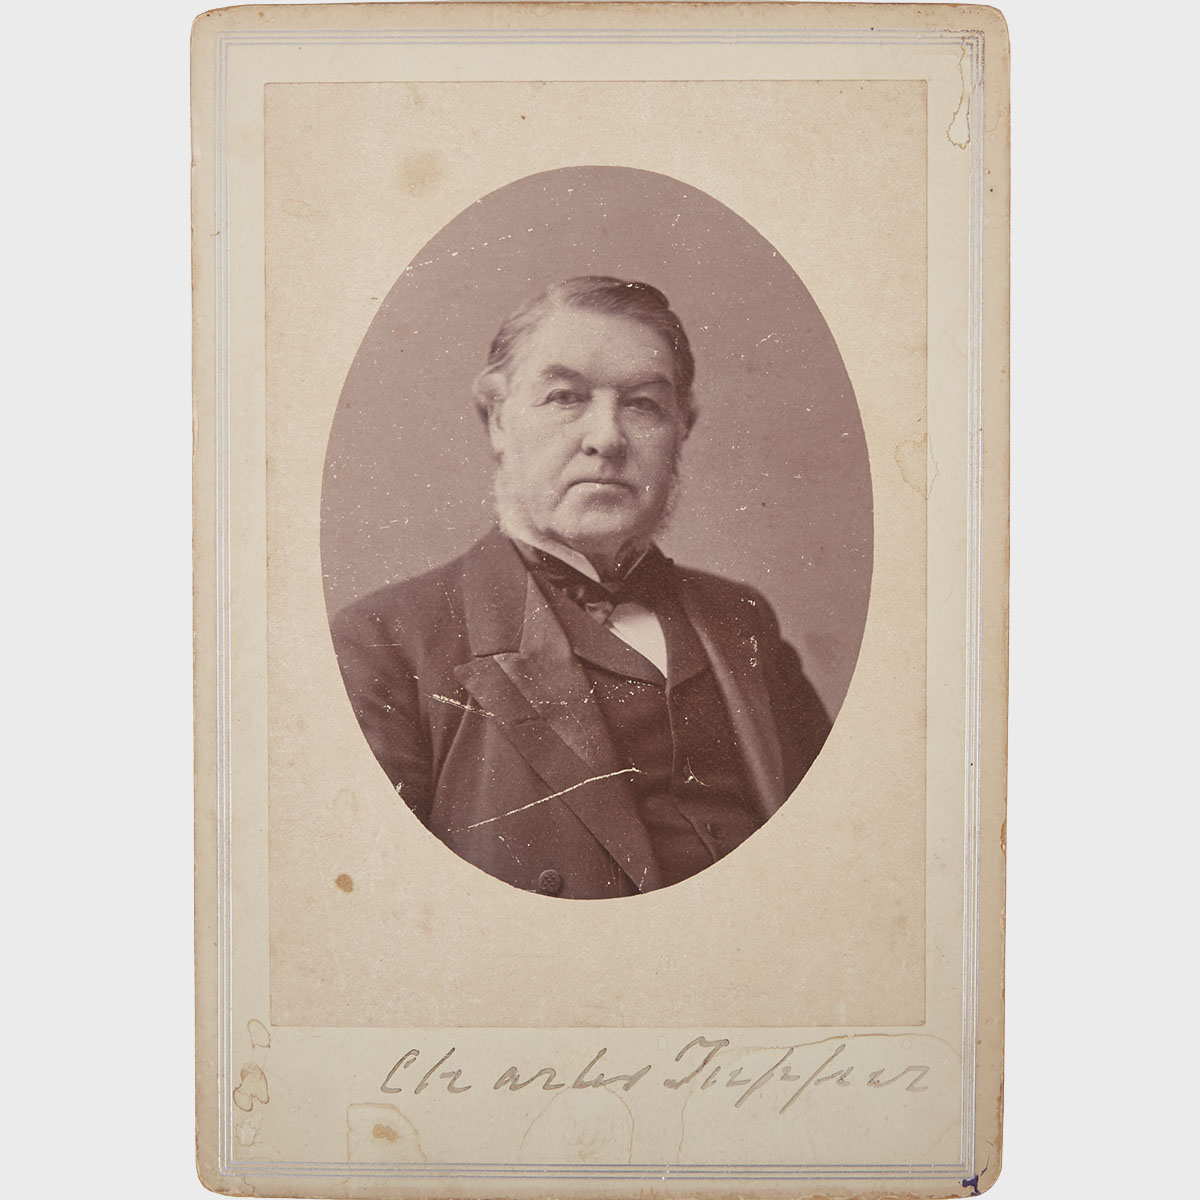 Sir Charles Tupper Signed Portrait Cabinet Card, William James Topley, 1896